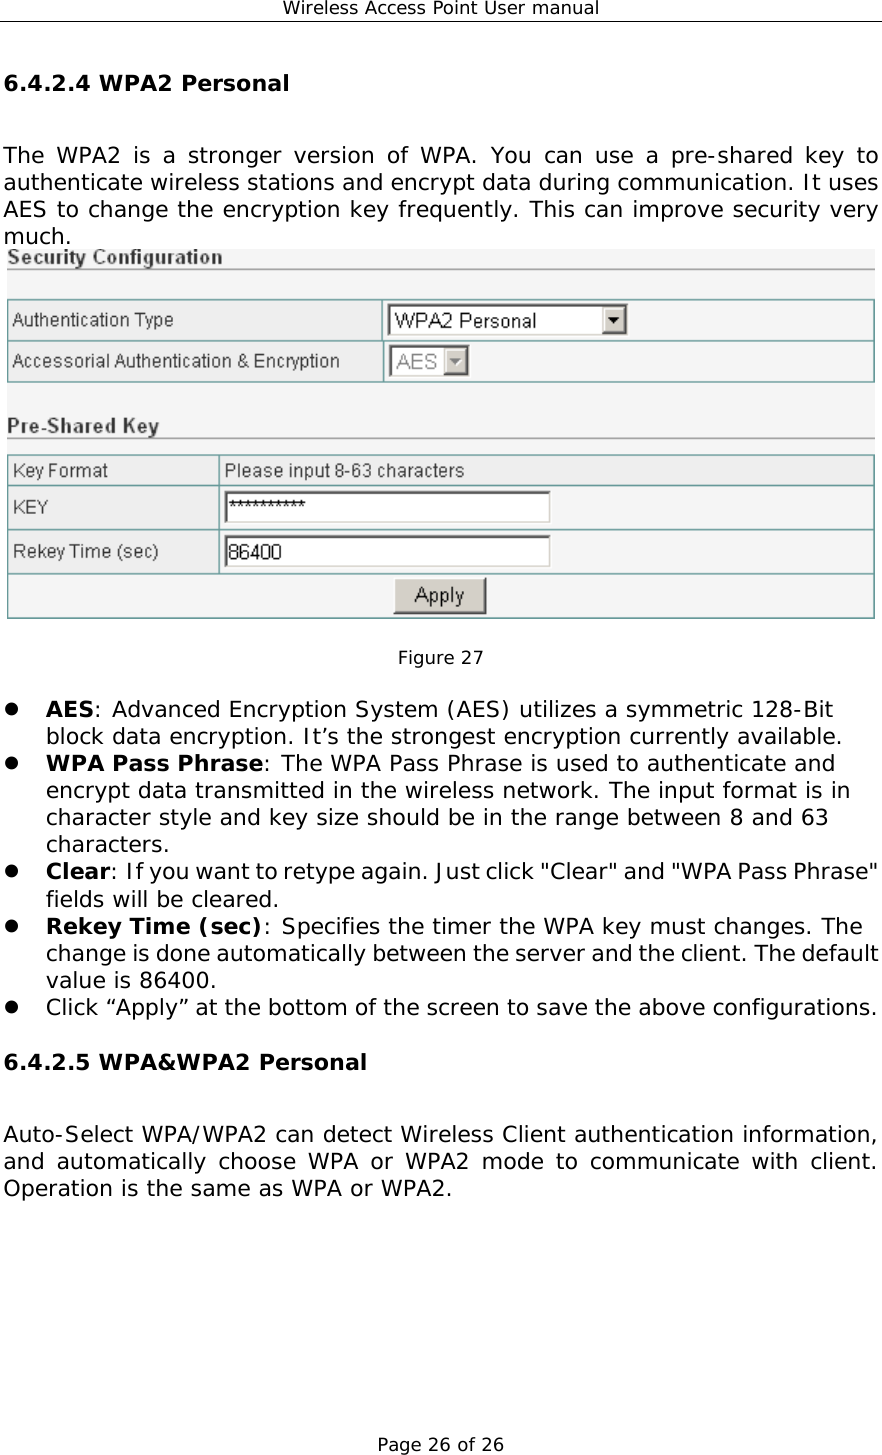 Wireless Access Point User manual Page 26 of 26 6.4.2.4 WPA2 Personal The WPA2 is a stronger version of WPA. You can use a pre-shared key to authenticate wireless stations and encrypt data during communication. It uses AES to change the encryption key frequently. This can improve security very much.   Figure 27    AES: Advanced Encryption System (AES) utilizes a symmetric 128-Bit block data encryption. It’s the strongest encryption currently available.   WPA Pass Phrase: The WPA Pass Phrase is used to authenticate and encrypt data transmitted in the wireless network. The input format is in character style and key size should be in the range between 8 and 63 characters.   Clear: If you want to retype again. Just click &quot;Clear&quot; and &quot;WPA Pass Phrase&quot; fields will be cleared.   Rekey Time (sec): Specifies the timer the WPA key must changes. The change is done automatically between the server and the client. The default value is 86400.   Click “Apply” at the bottom of the screen to save the above configurations. 6.4.2.5 WPA&amp;WPA2 Personal Auto-Select WPA/WPA2 can detect Wireless Client authentication information, and automatically choose WPA or WPA2 mode to communicate with client. Operation is the same as WPA or WPA2. 